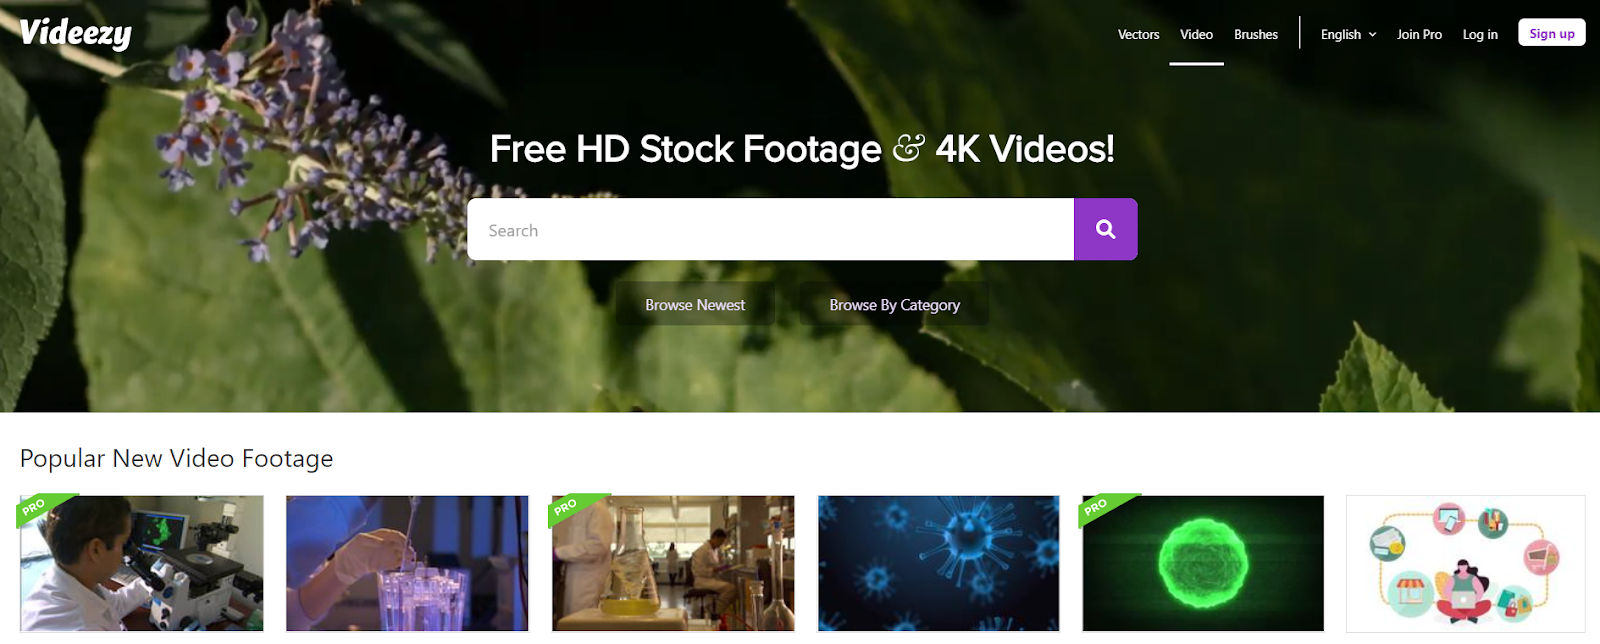 videezy is a website for stock footage